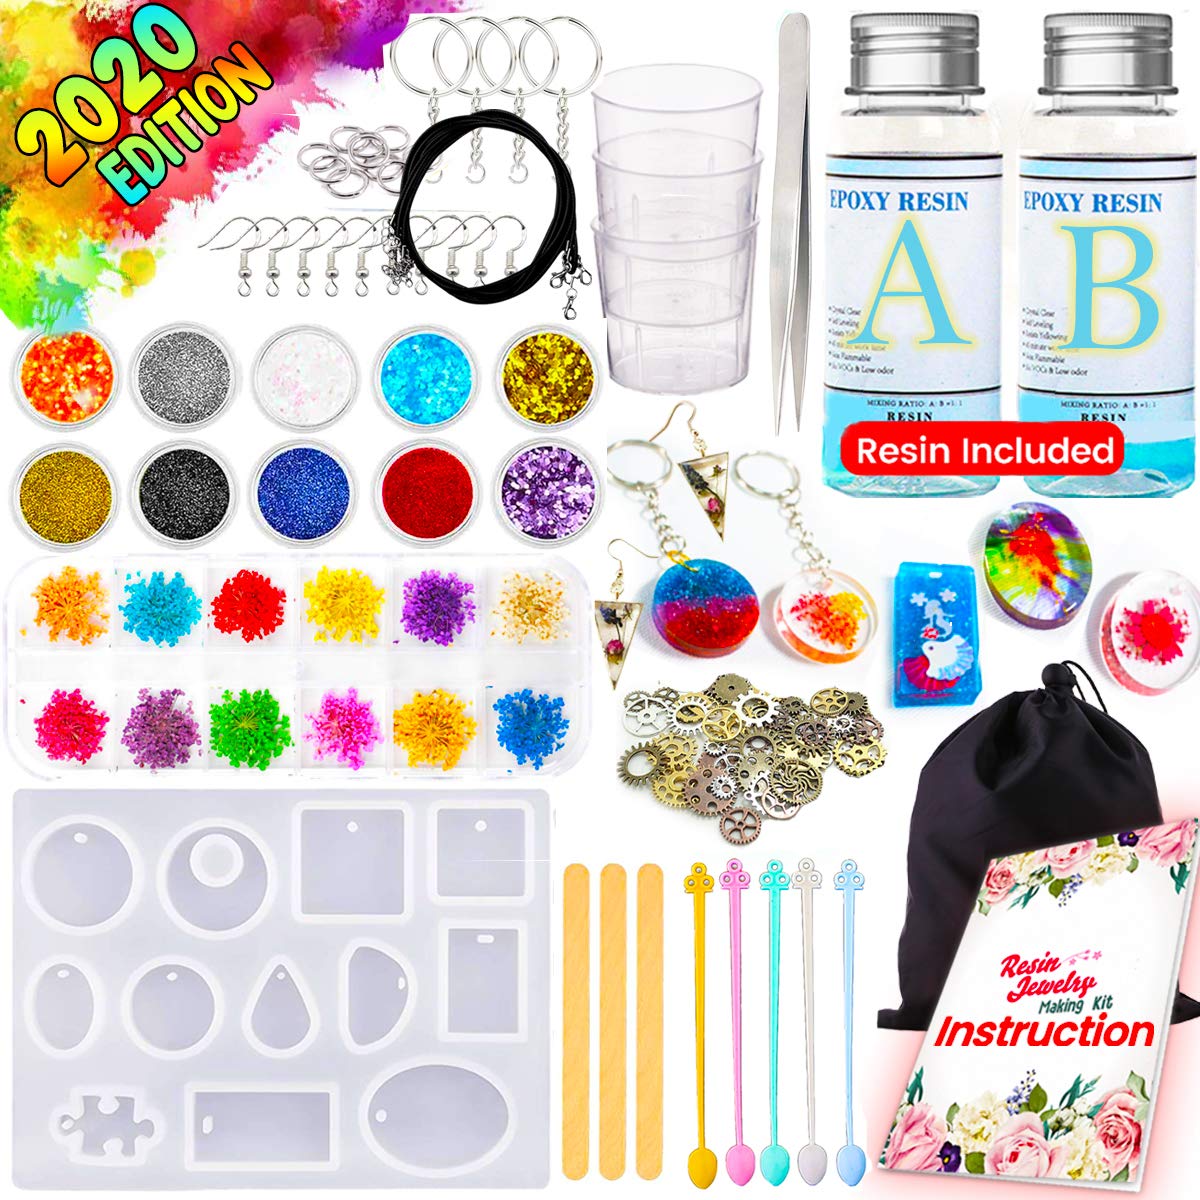 Goodyking Resin Jewelry Making Starter Kit - Resin Kits for Beginners with Molds and Resin Jewelry Making Supplies - Silicone Casting Mold, Tools Set